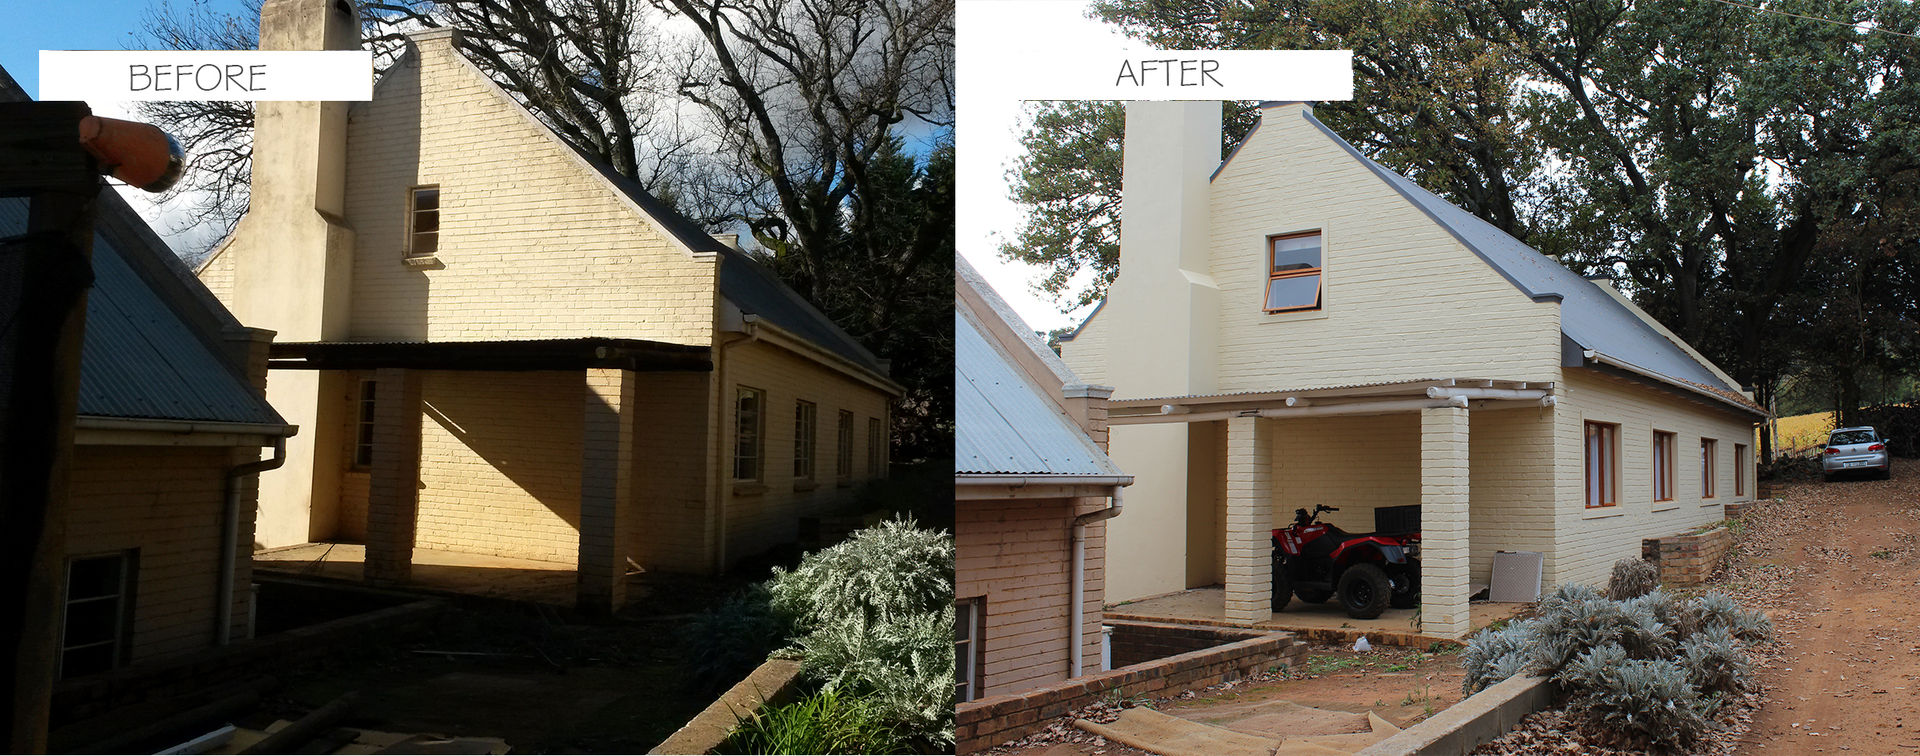 Before & After Covet Design Classic style houses